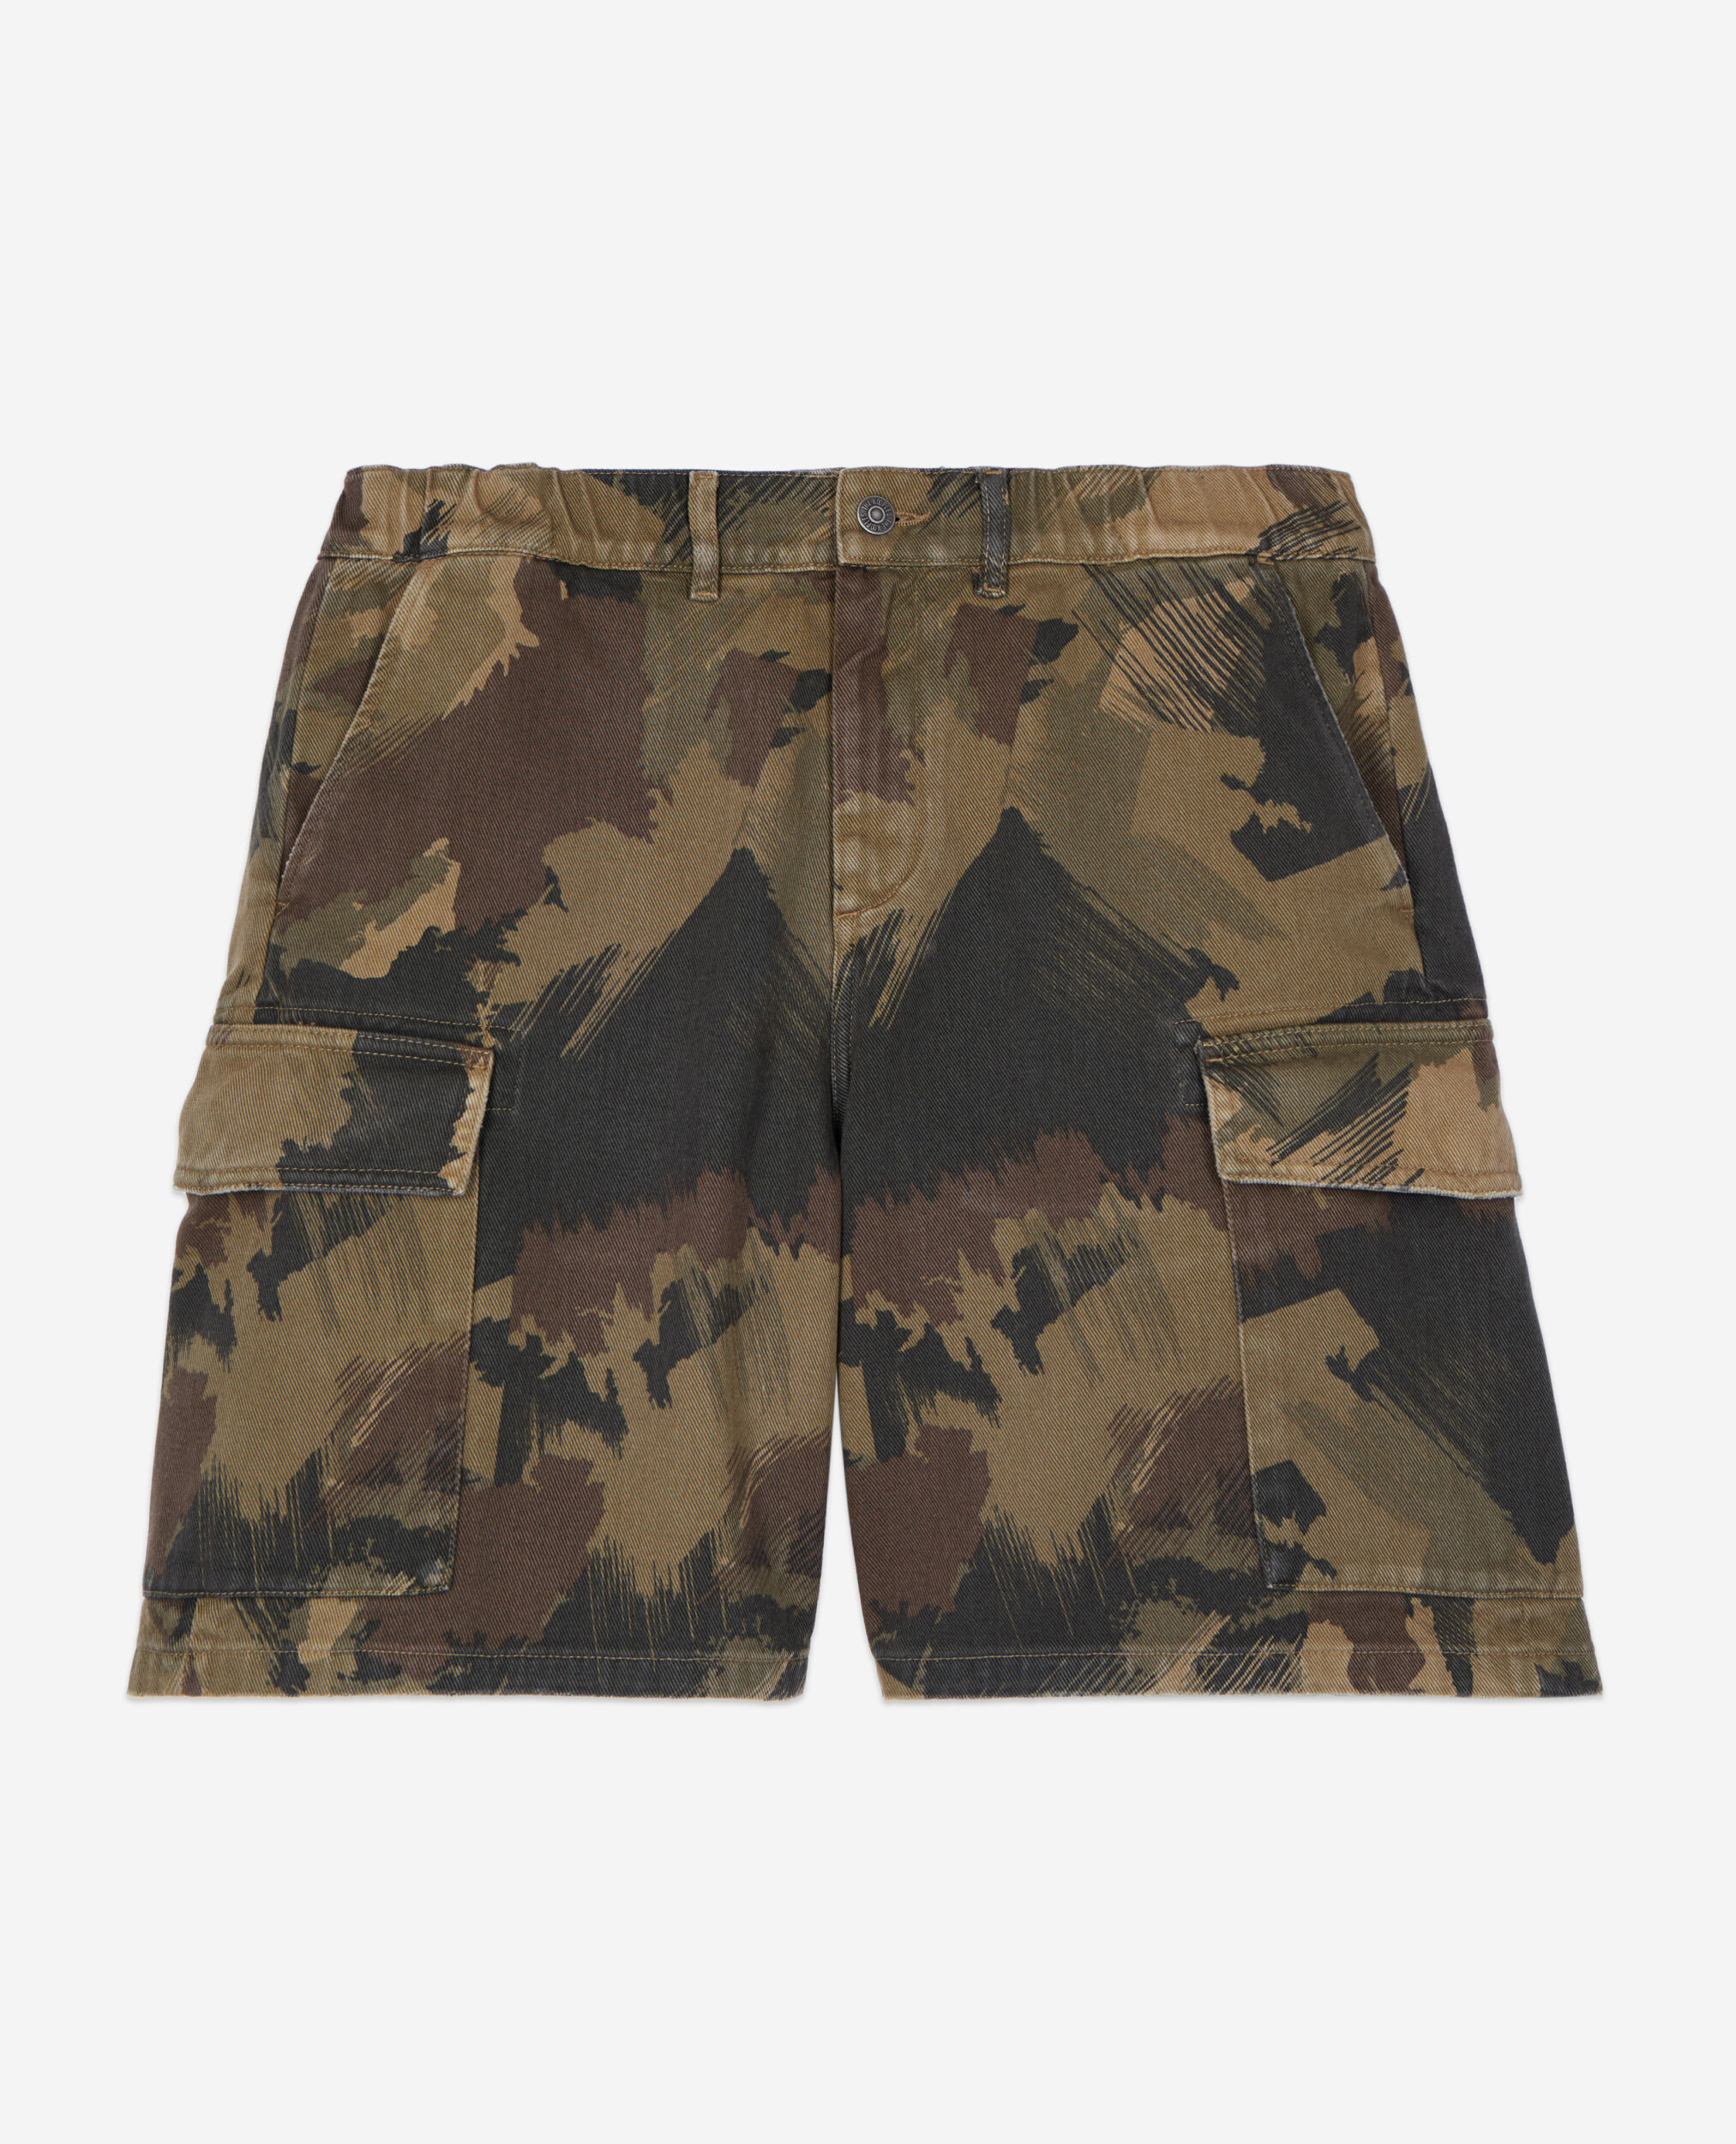 Cargoshorts in Camouflage, CAMOUFLAGE, hi-res image number null